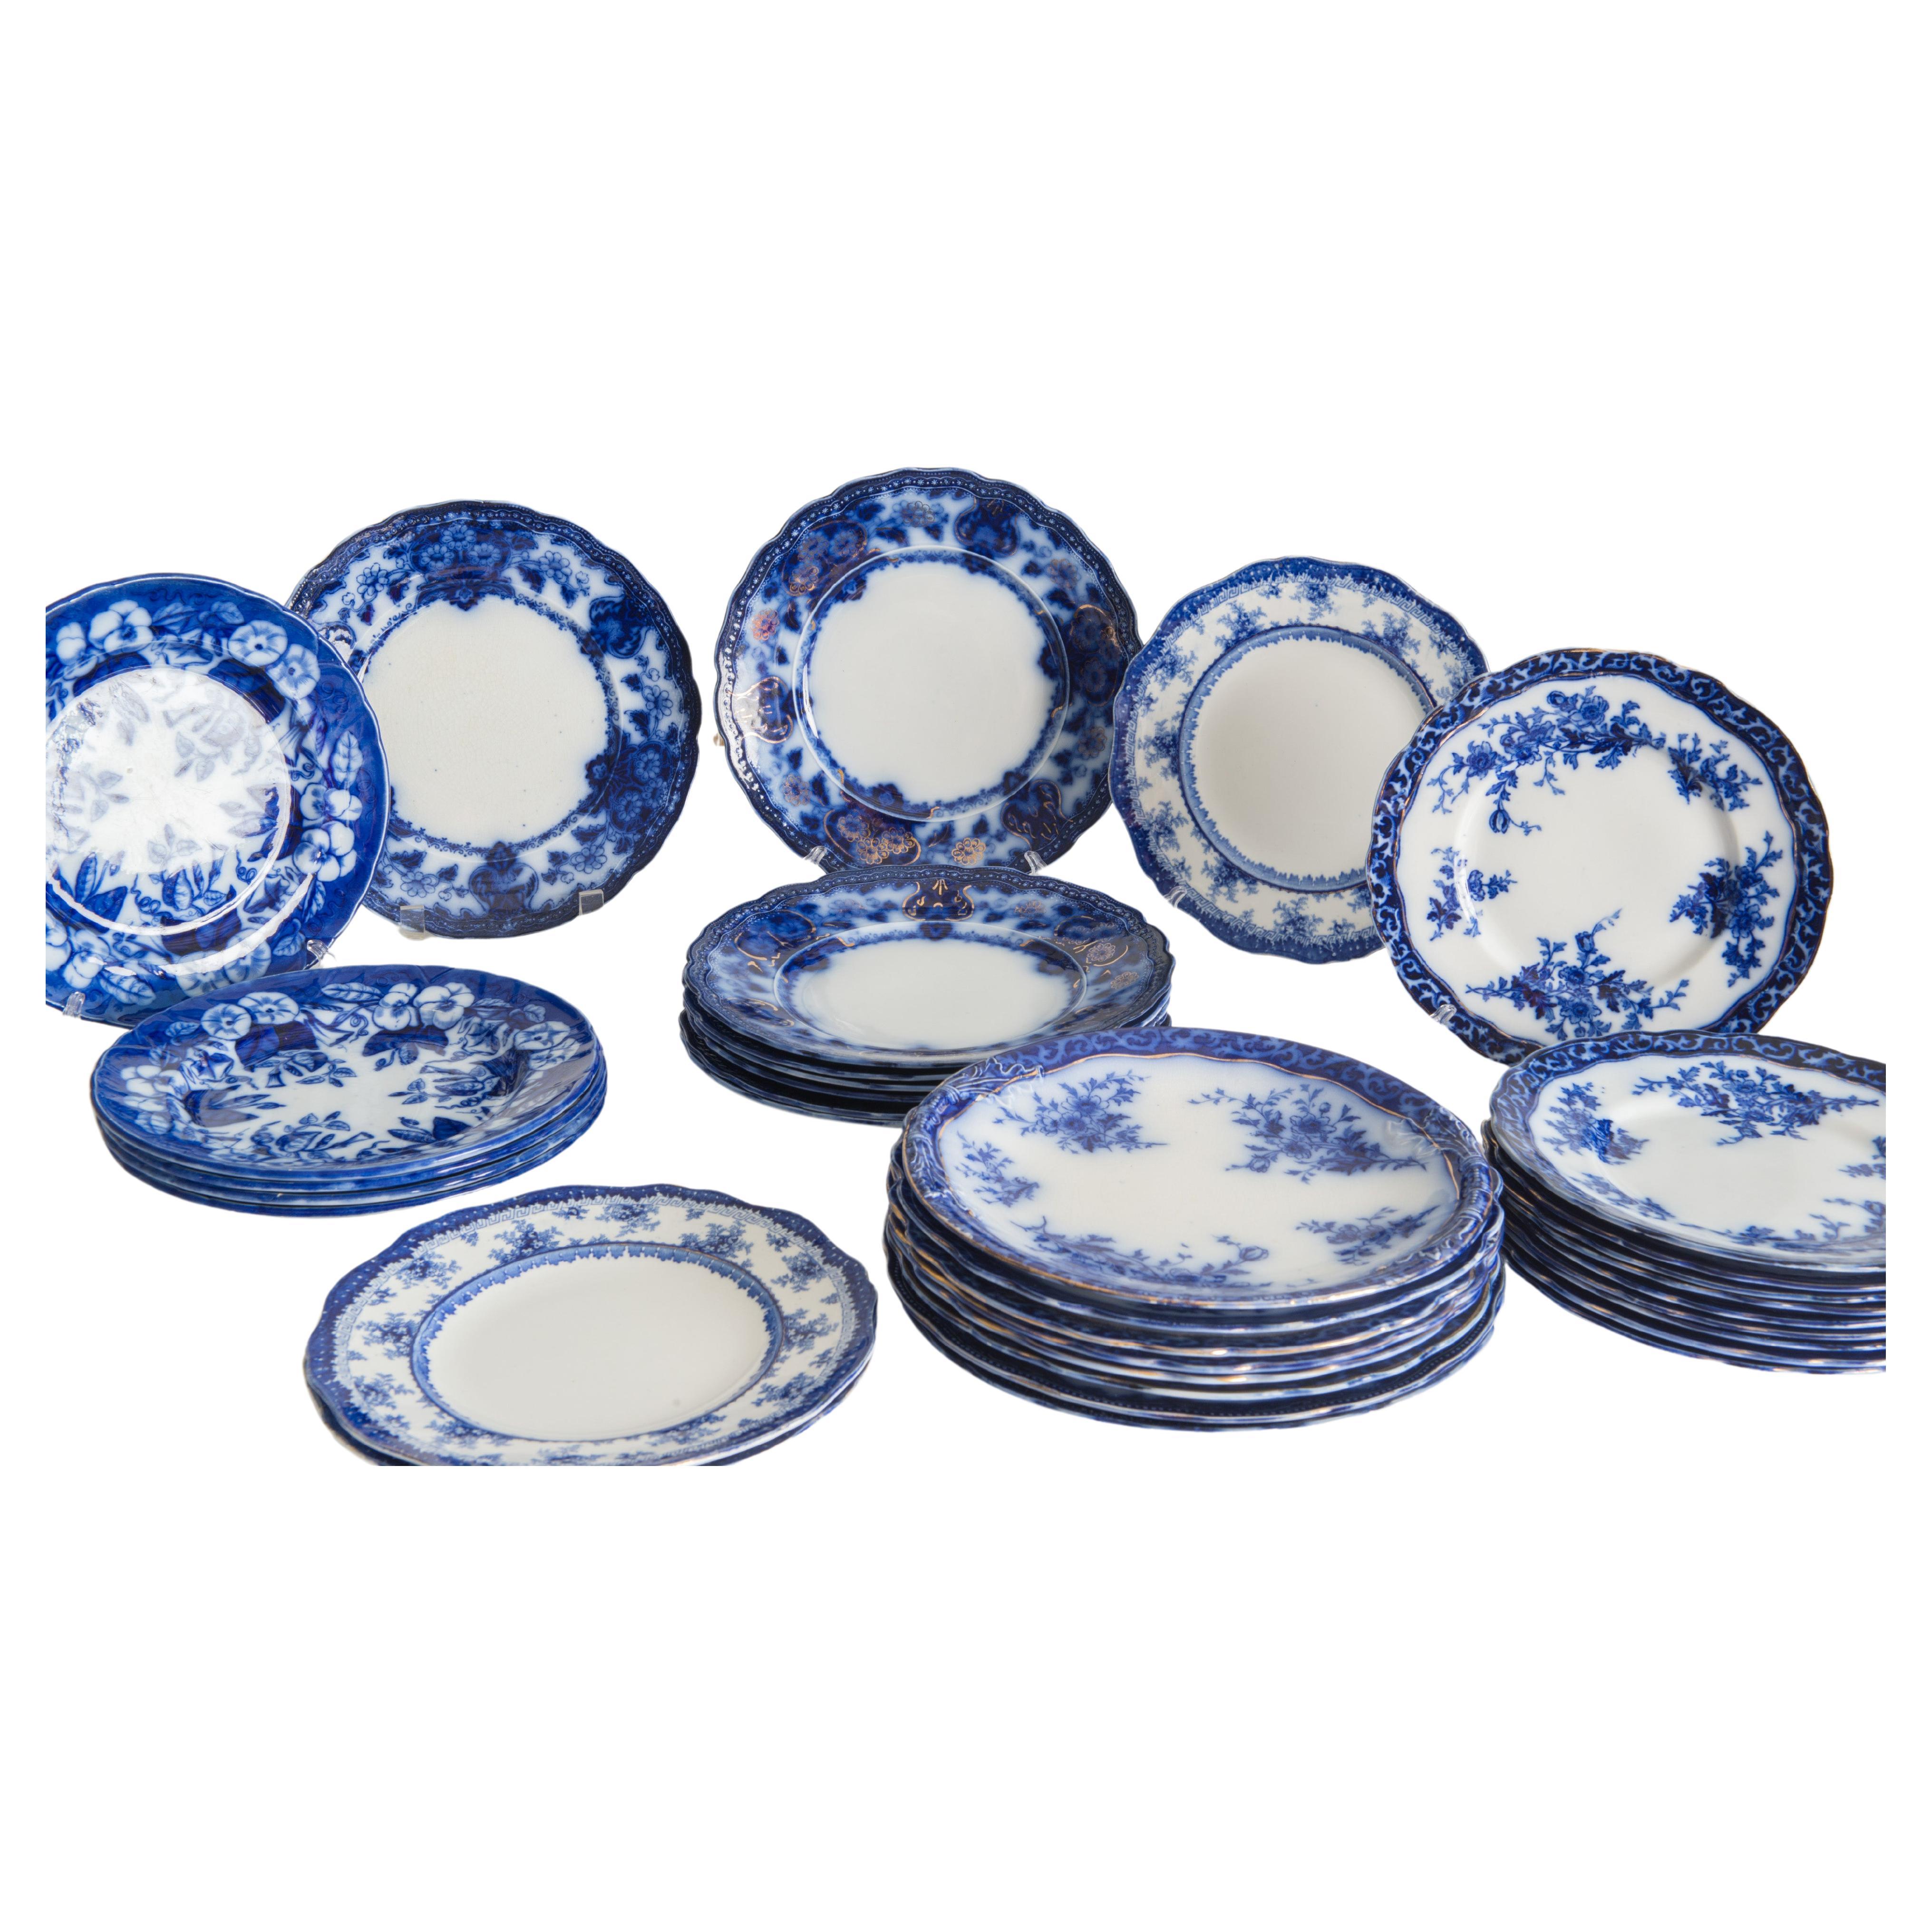 The count of 188 pieces is good antique china with some minor flaws. This set includes an additional 39 pieces of chipped or cracked pieces that might be useful on display or restored. One company is Touraine by Stanley Pottery, marked England.